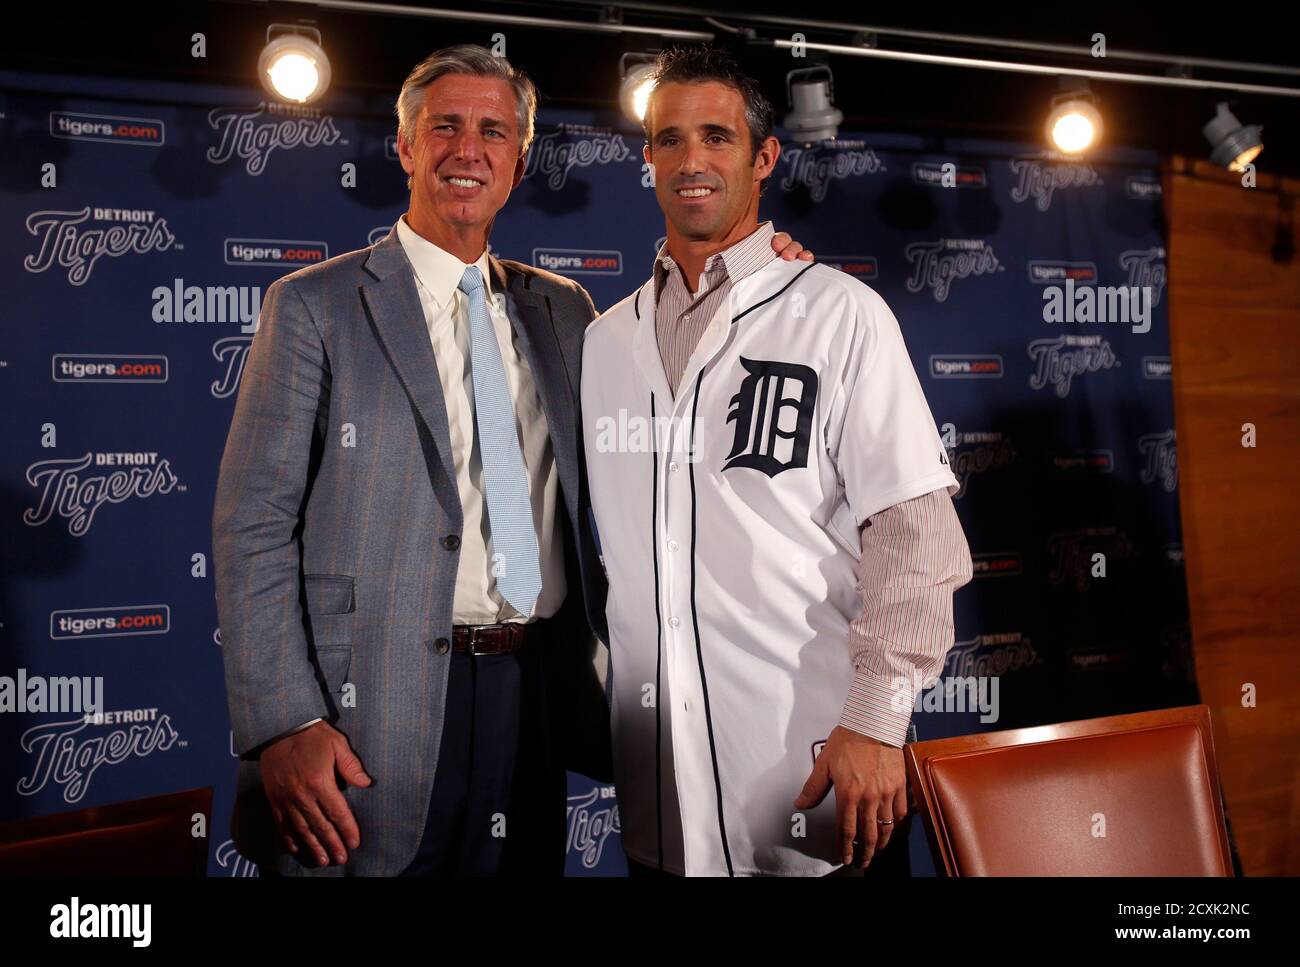 Detroit Tigers General Manager Dave Dombrowski (L ) and newly named Tigers manager Brad Ausmus pose together during a press conference where Ausmus was named the 37th manager in franchise history of the Tigers in Detroit, Michigan November 3, 2013.   REUTERS/Rebecca Cook  (UNITED STATES - Tags: SPORT BASEBALL) Stock Photo